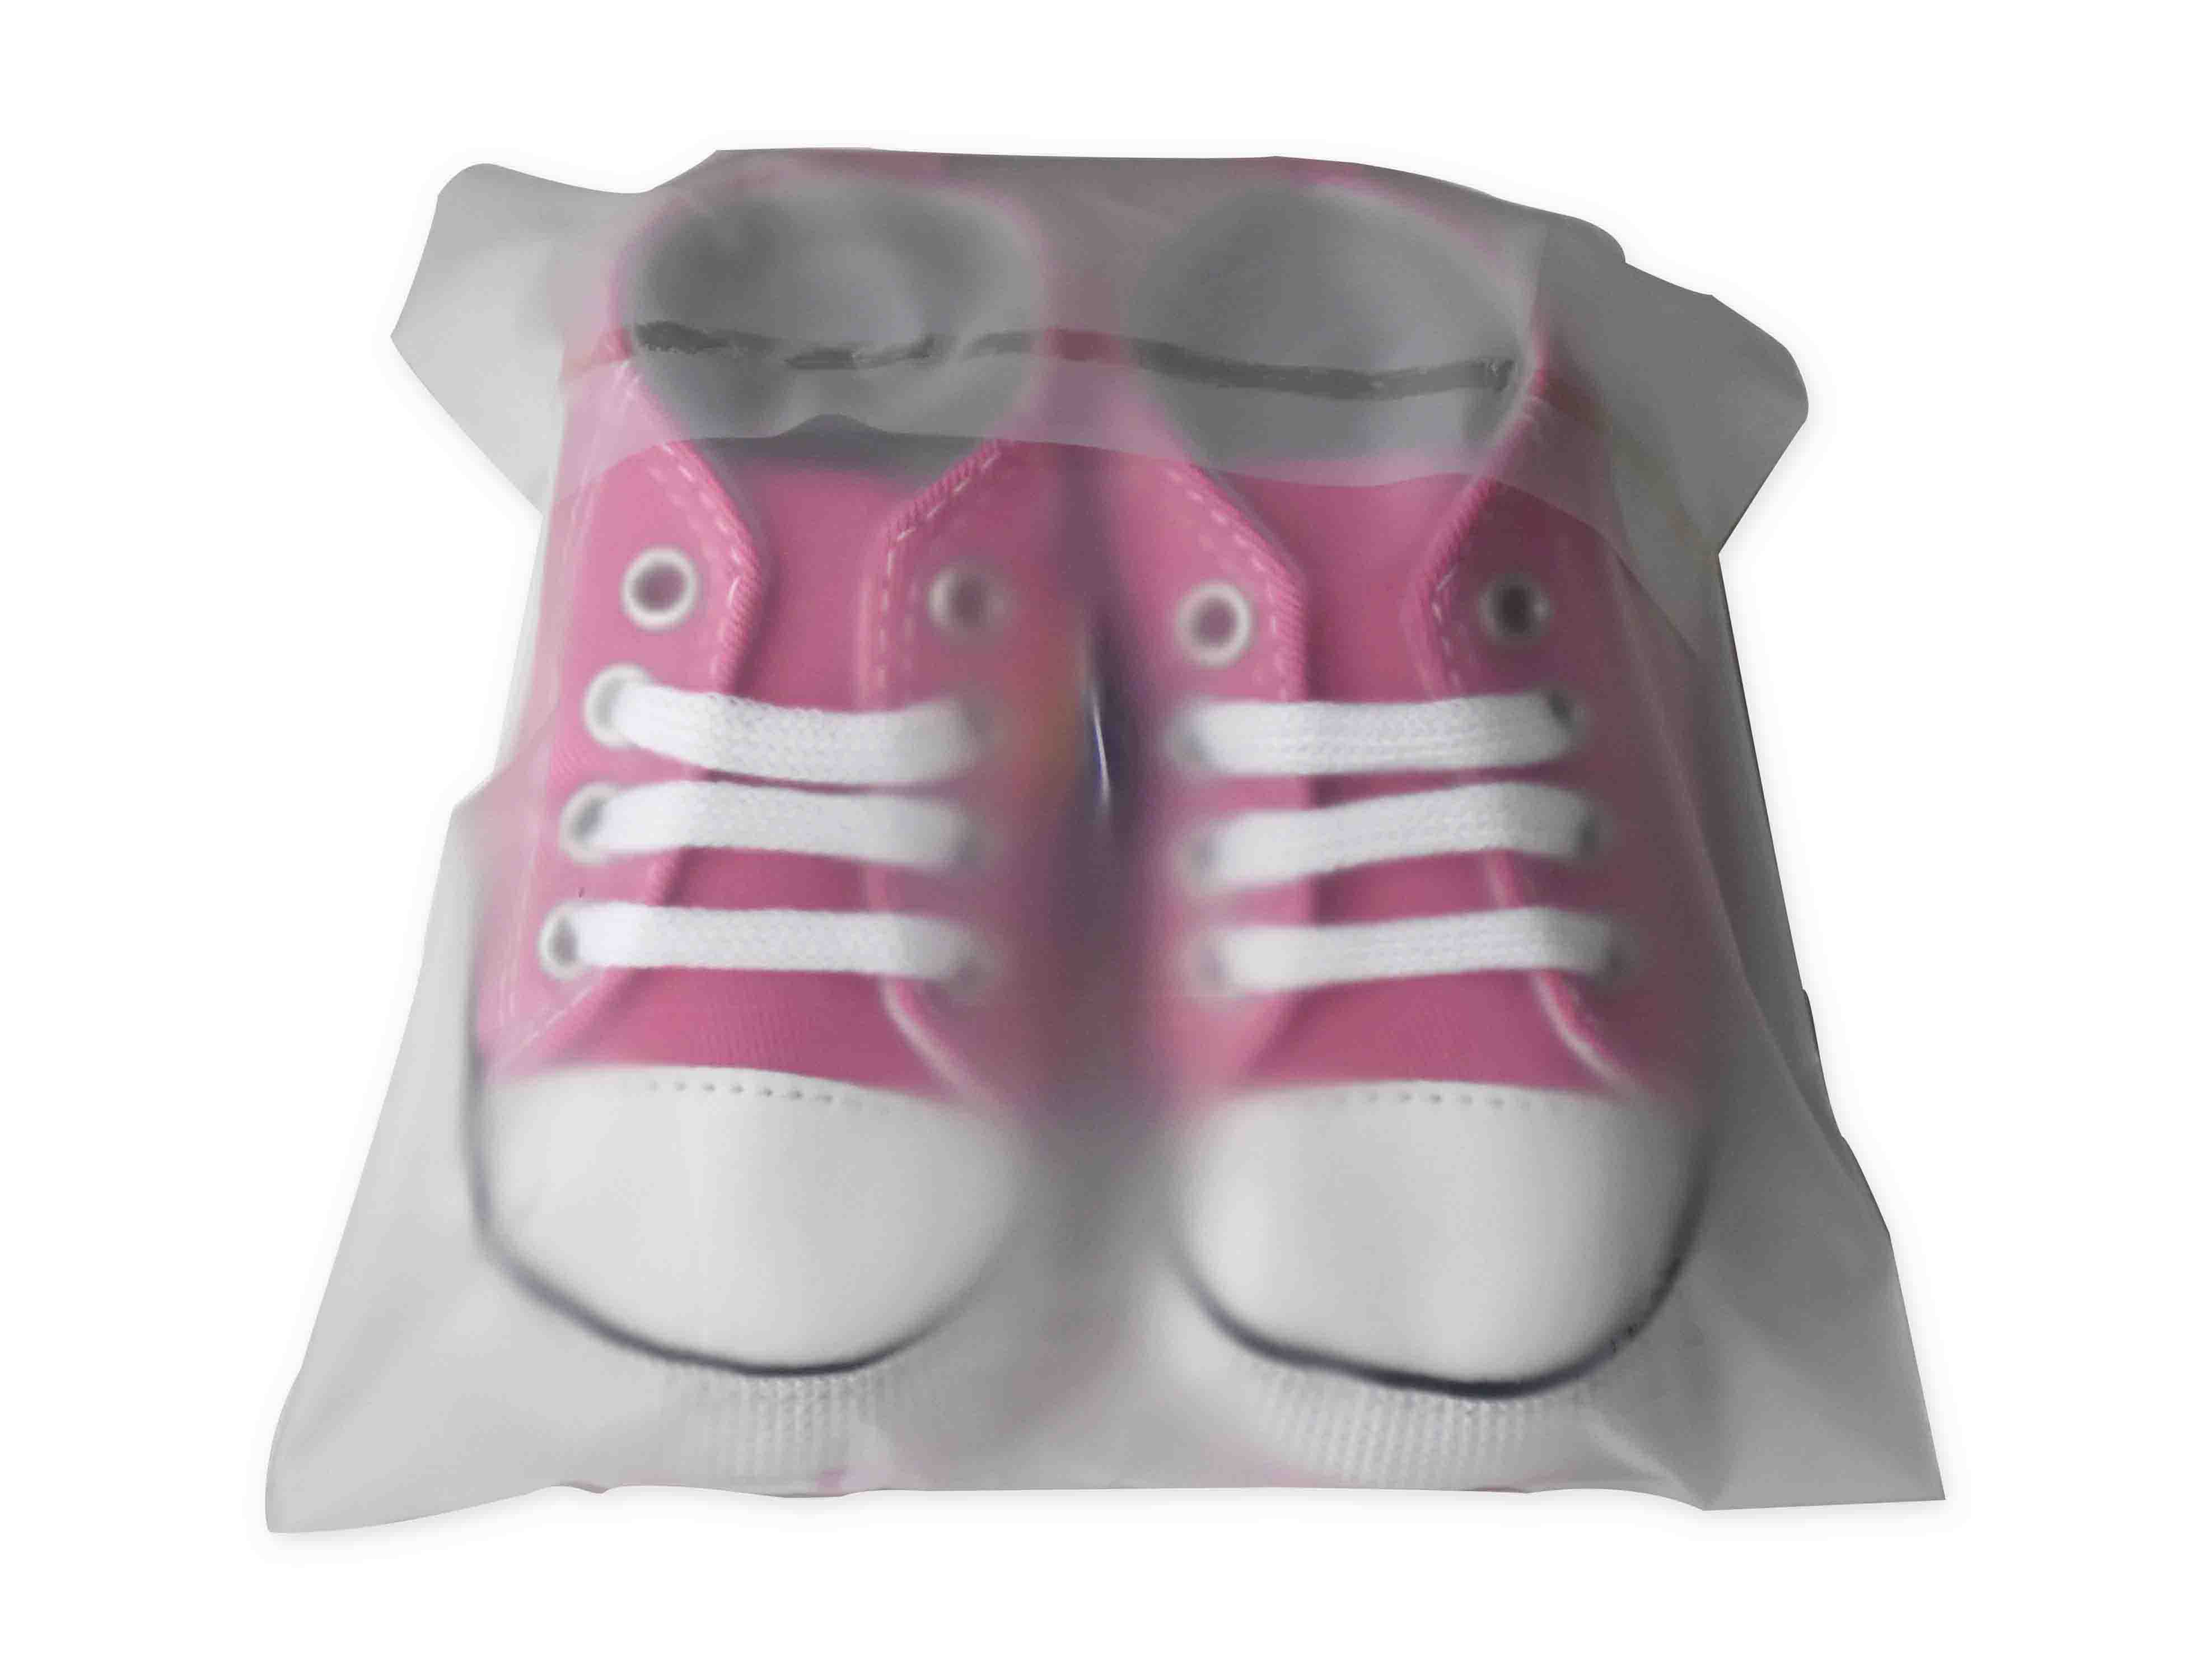 Wholesale cheap fluff boy and girl baby booties socks indoor toddler baby socks shoes